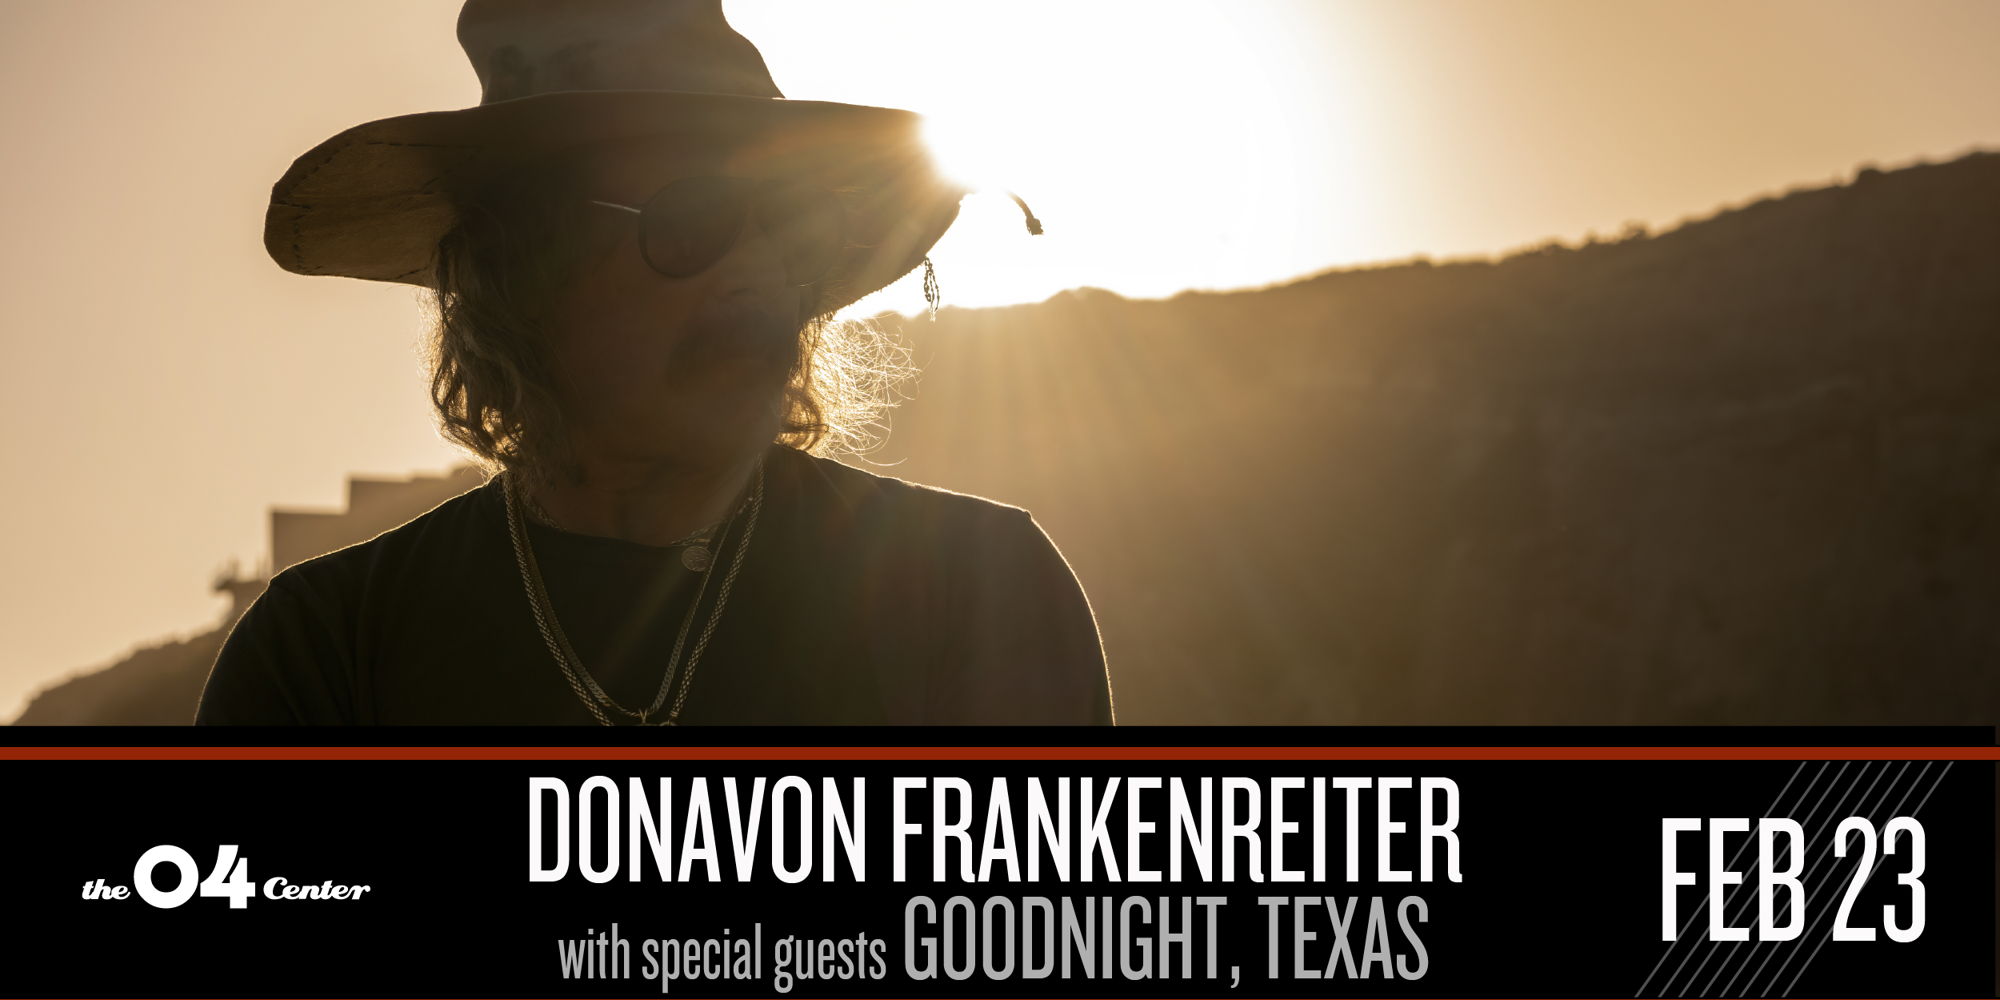 Donavon Frankenreiter featuring Goodnight Texas // A Special Full Band Tour promotional image